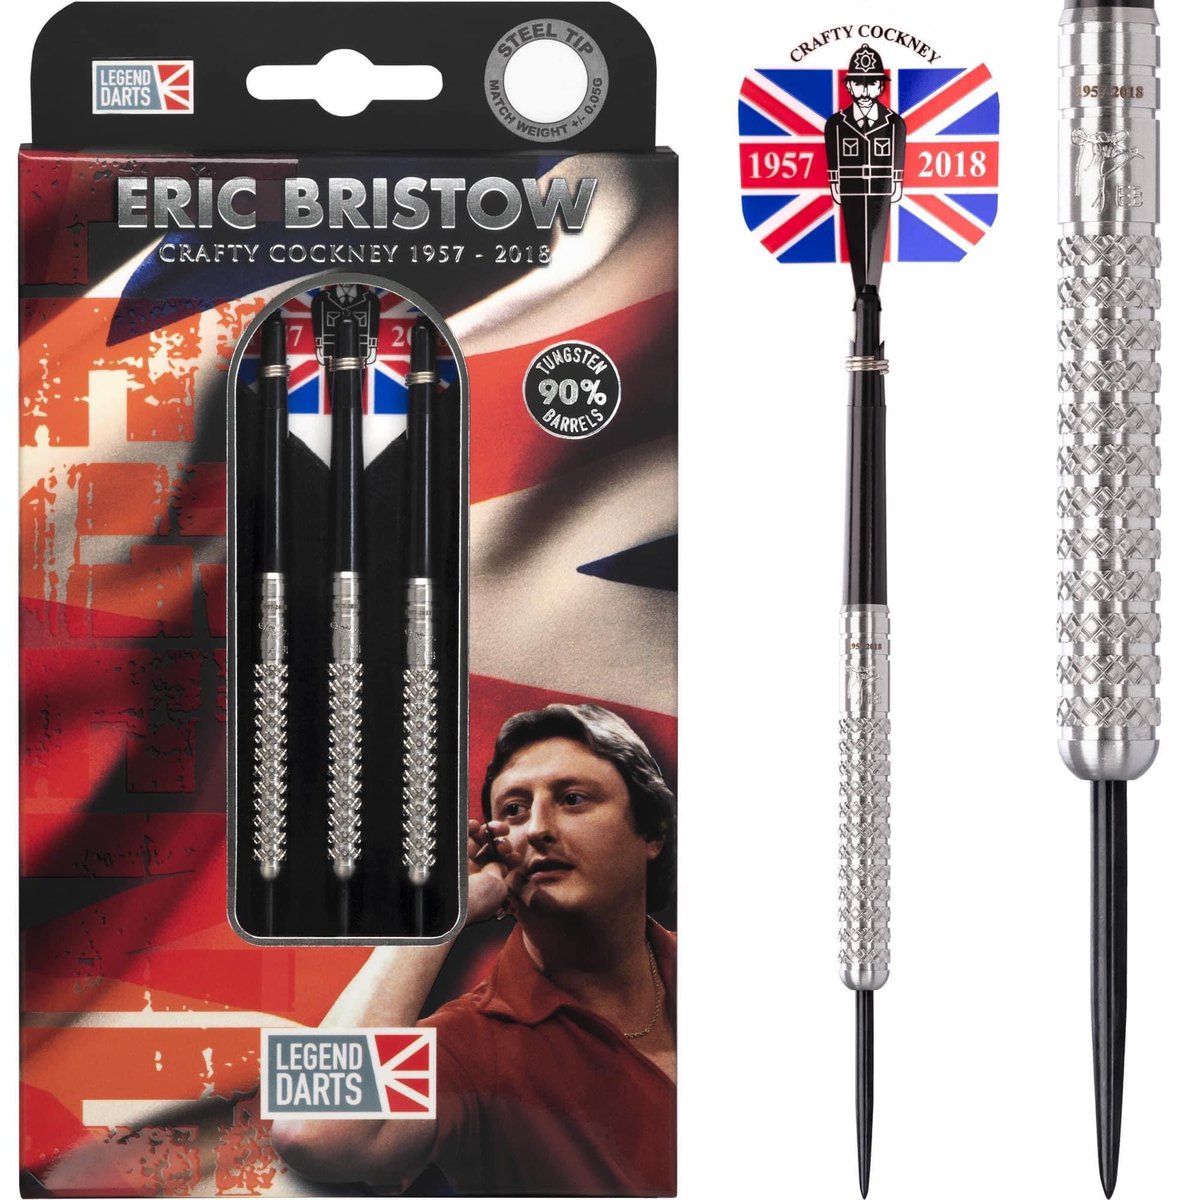 BRISTOW DARTS IN STOCK 🙌 The full Eric Bristow range is available here ⬇ bit.ly/EricBristowDar… Available now in all colours and weights🎯 Check out all Legend Darts products at legenddarts.com